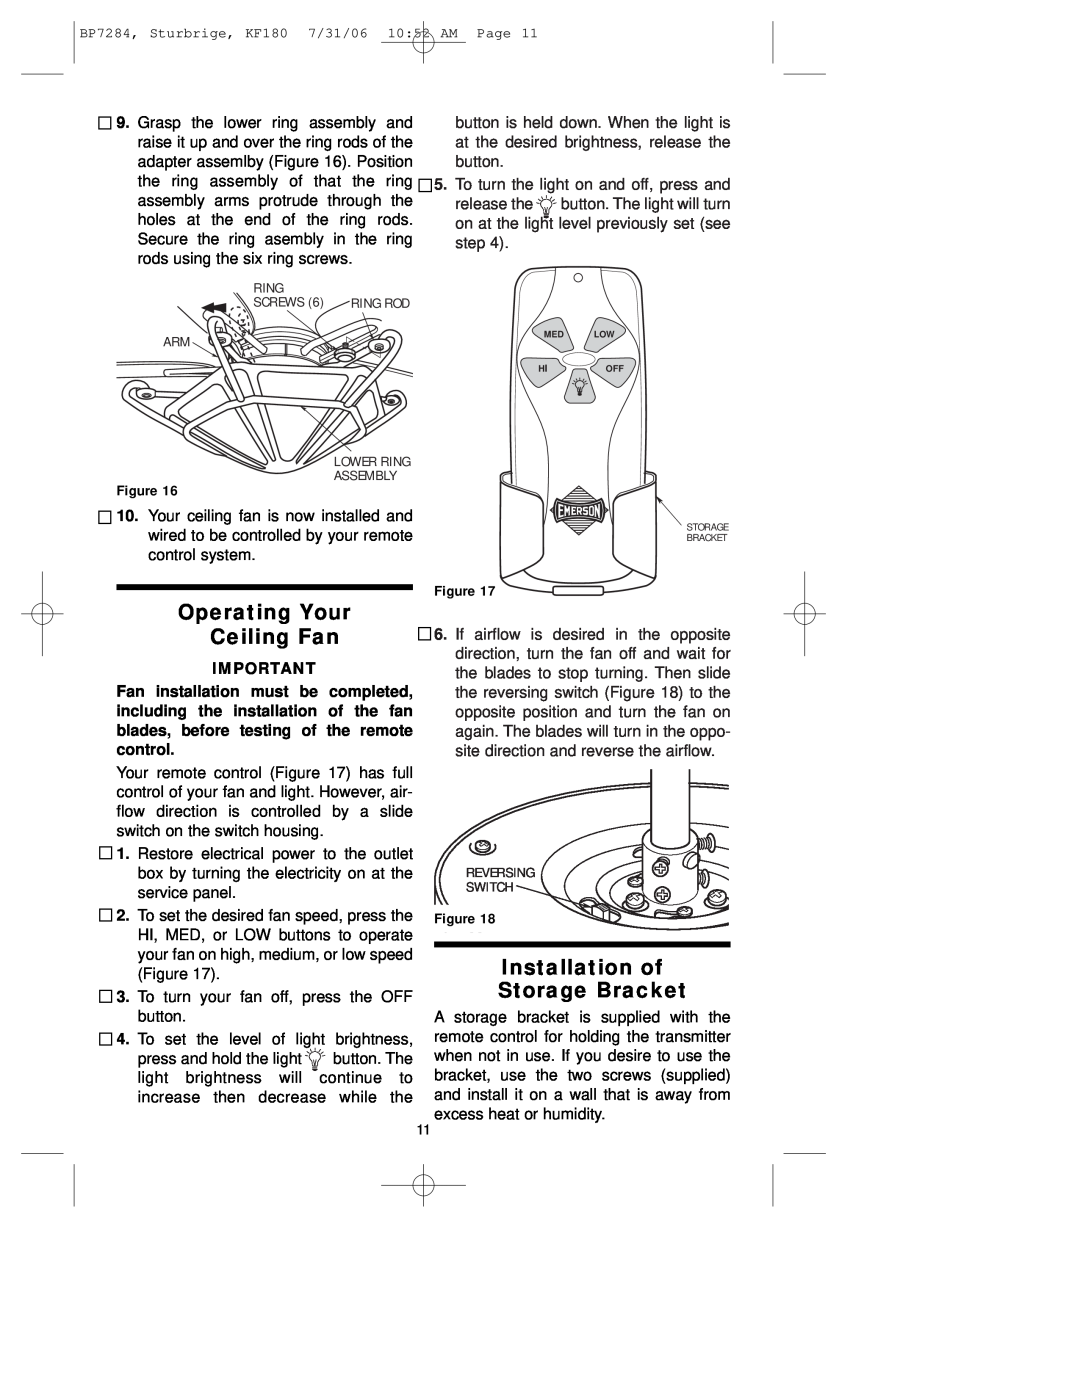 Emerson KF180 owner manual Operating Your Ceiling Fan, Installation of Storage Bracket 